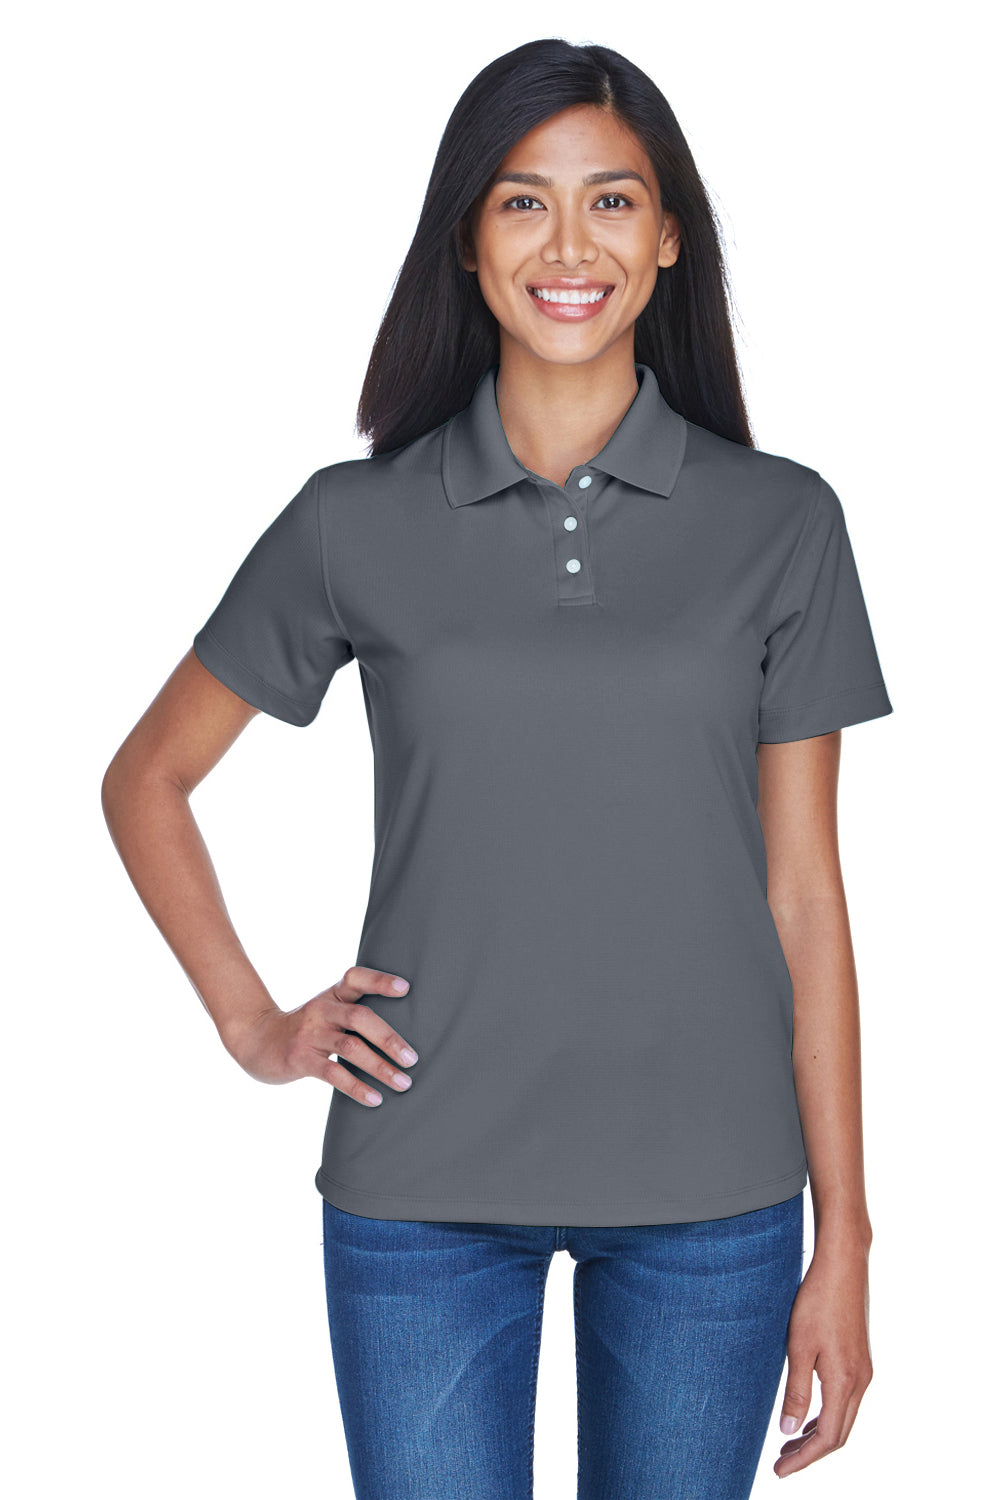 UltraClub 8445L Womens Cool & Dry Performance Moisture Wicking Short Sleeve Polo Shirt Charcoal Grey Front